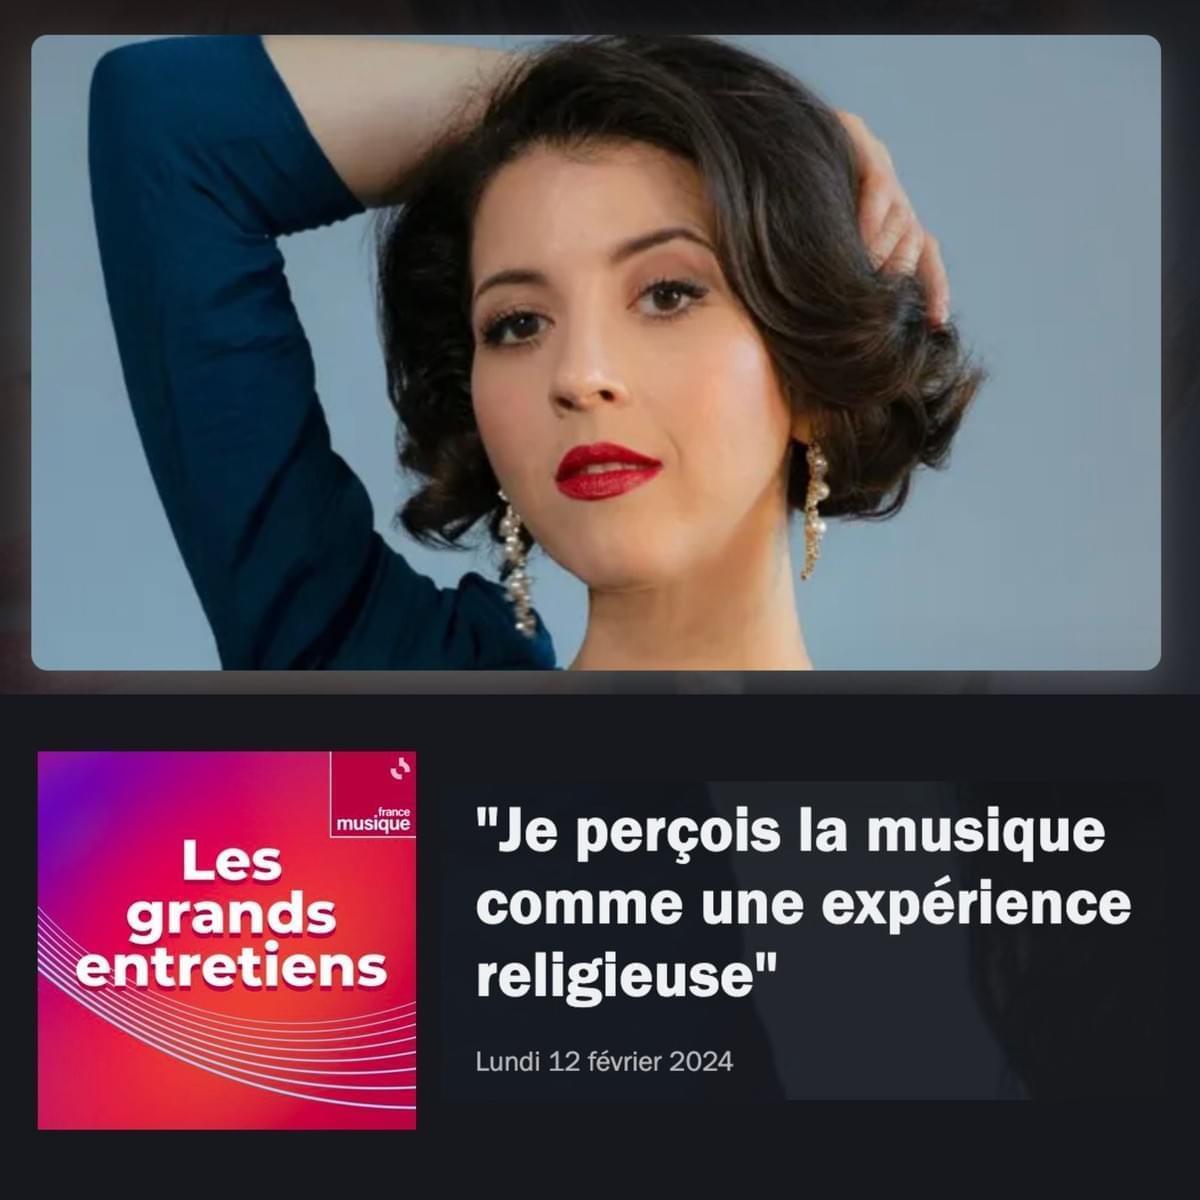 Lisette is interviewed in a 5 part series on aLes Grands Entretiens on France Musique